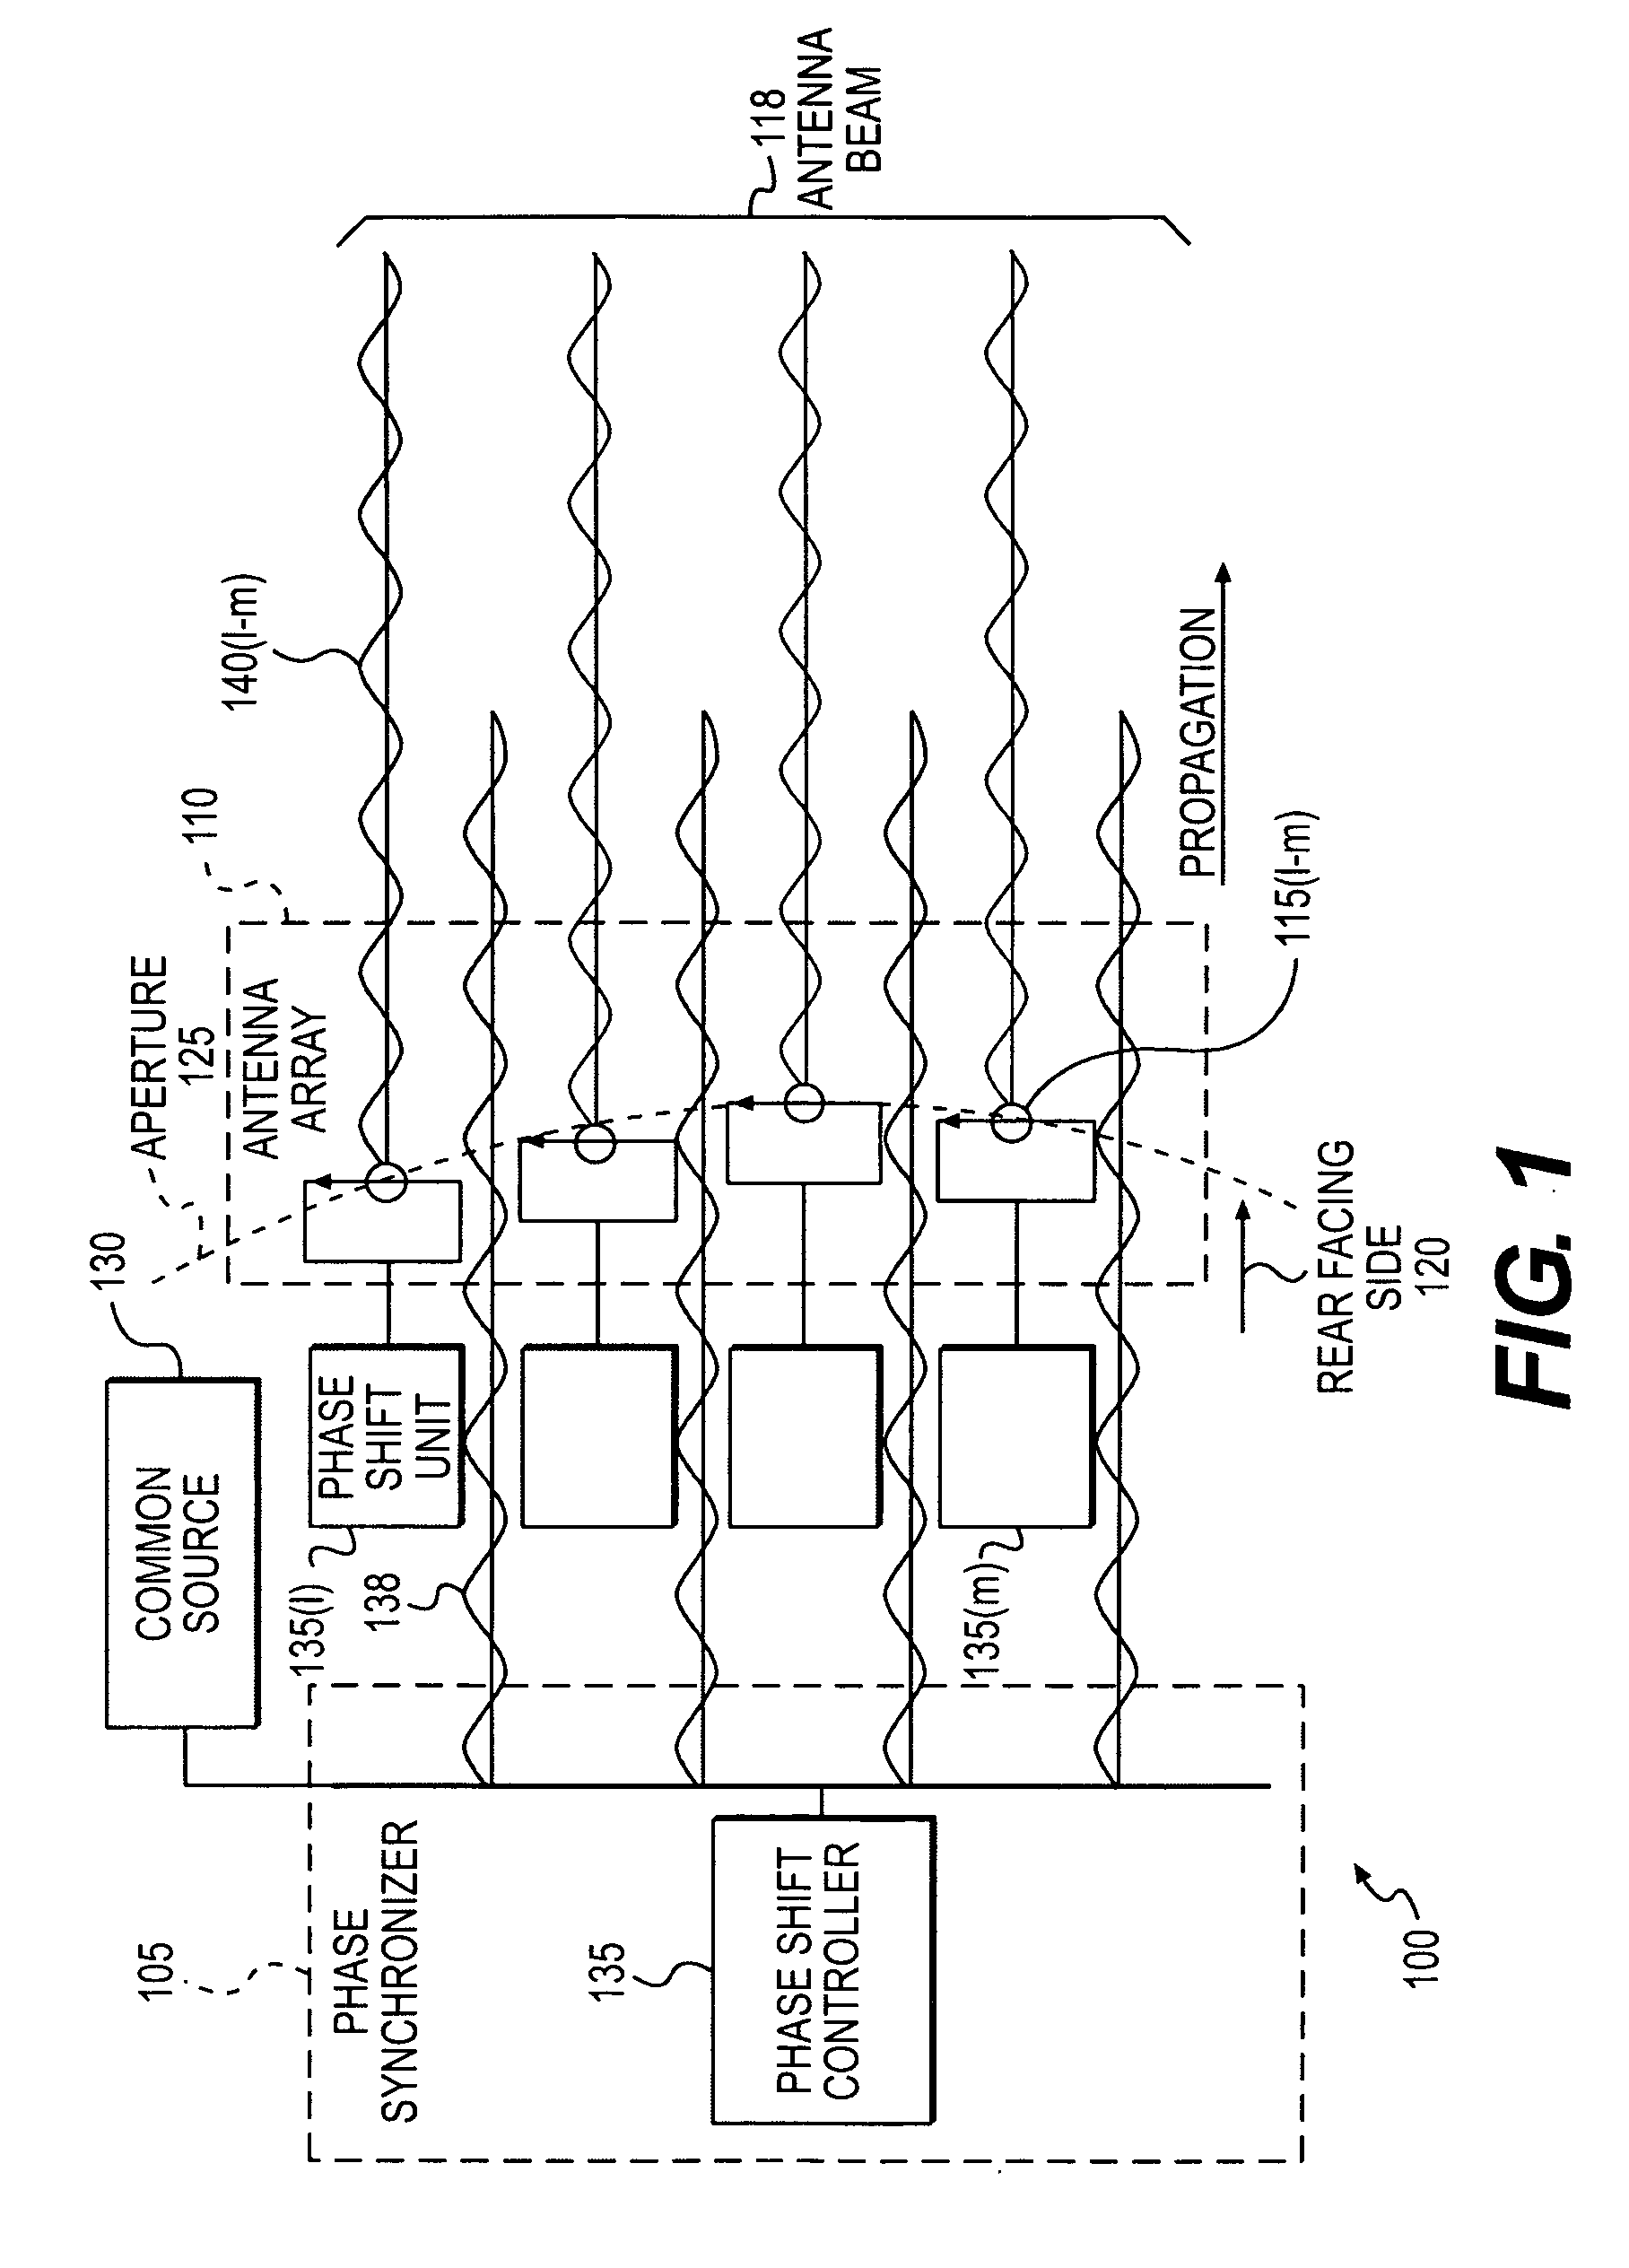 Forming an antenna beam using an array of antennas to provide a wireless communication